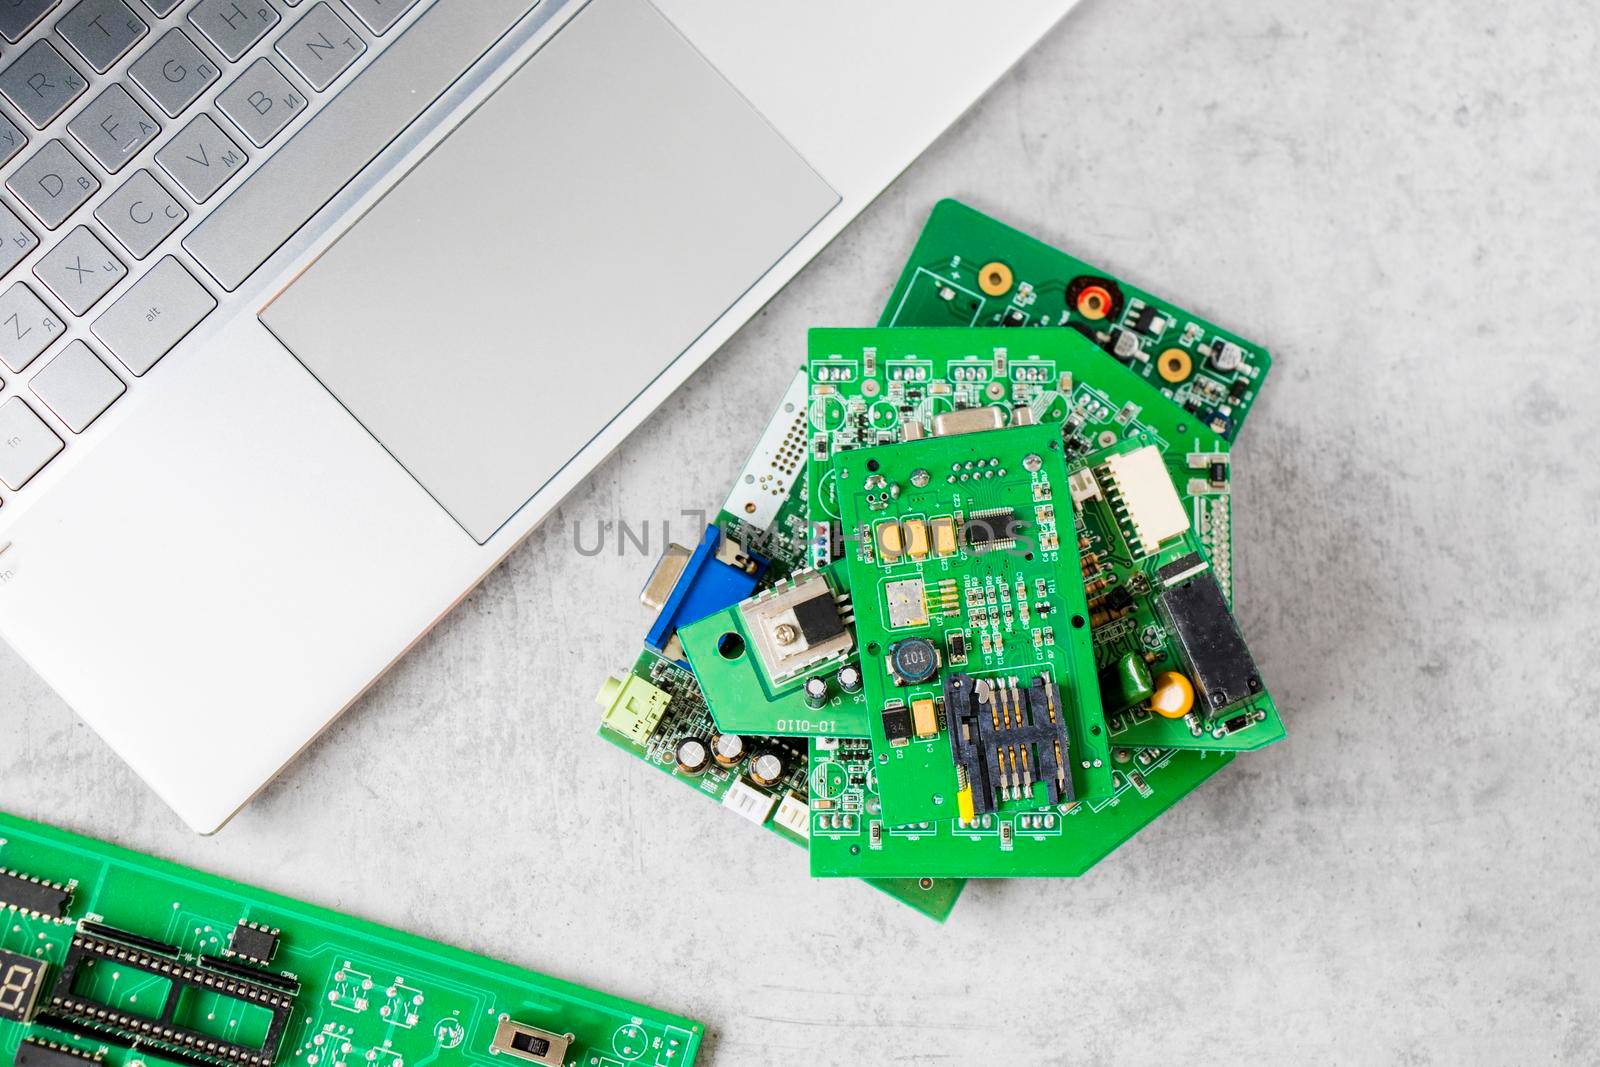 Electronic motherboard, isometric processor microchip, motherboard parts and laptop notebook , digital communication, people and technologies, digital life